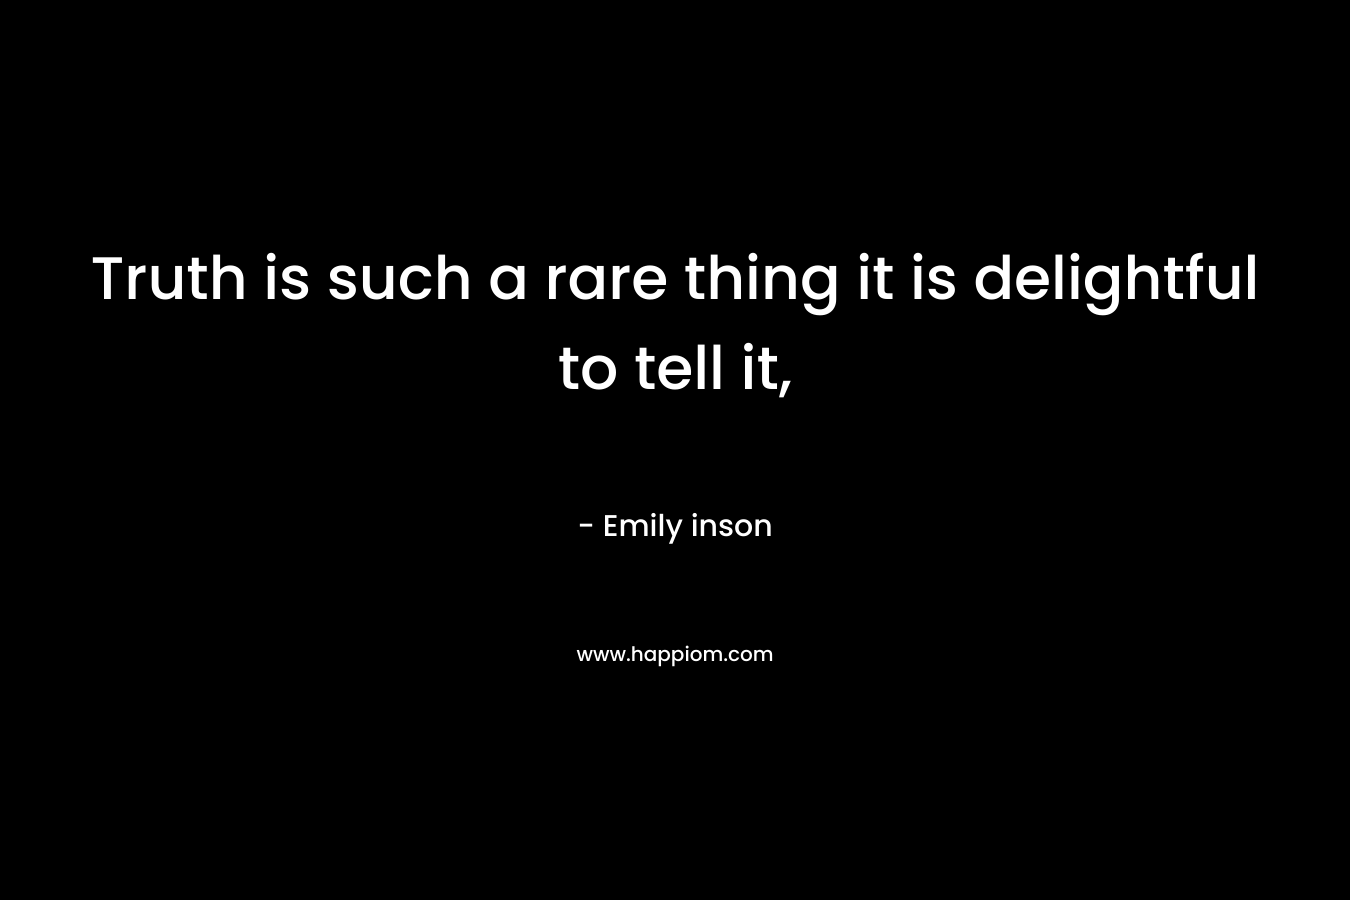 Truth is such a rare thing it is delightful to tell it, – Emily inson